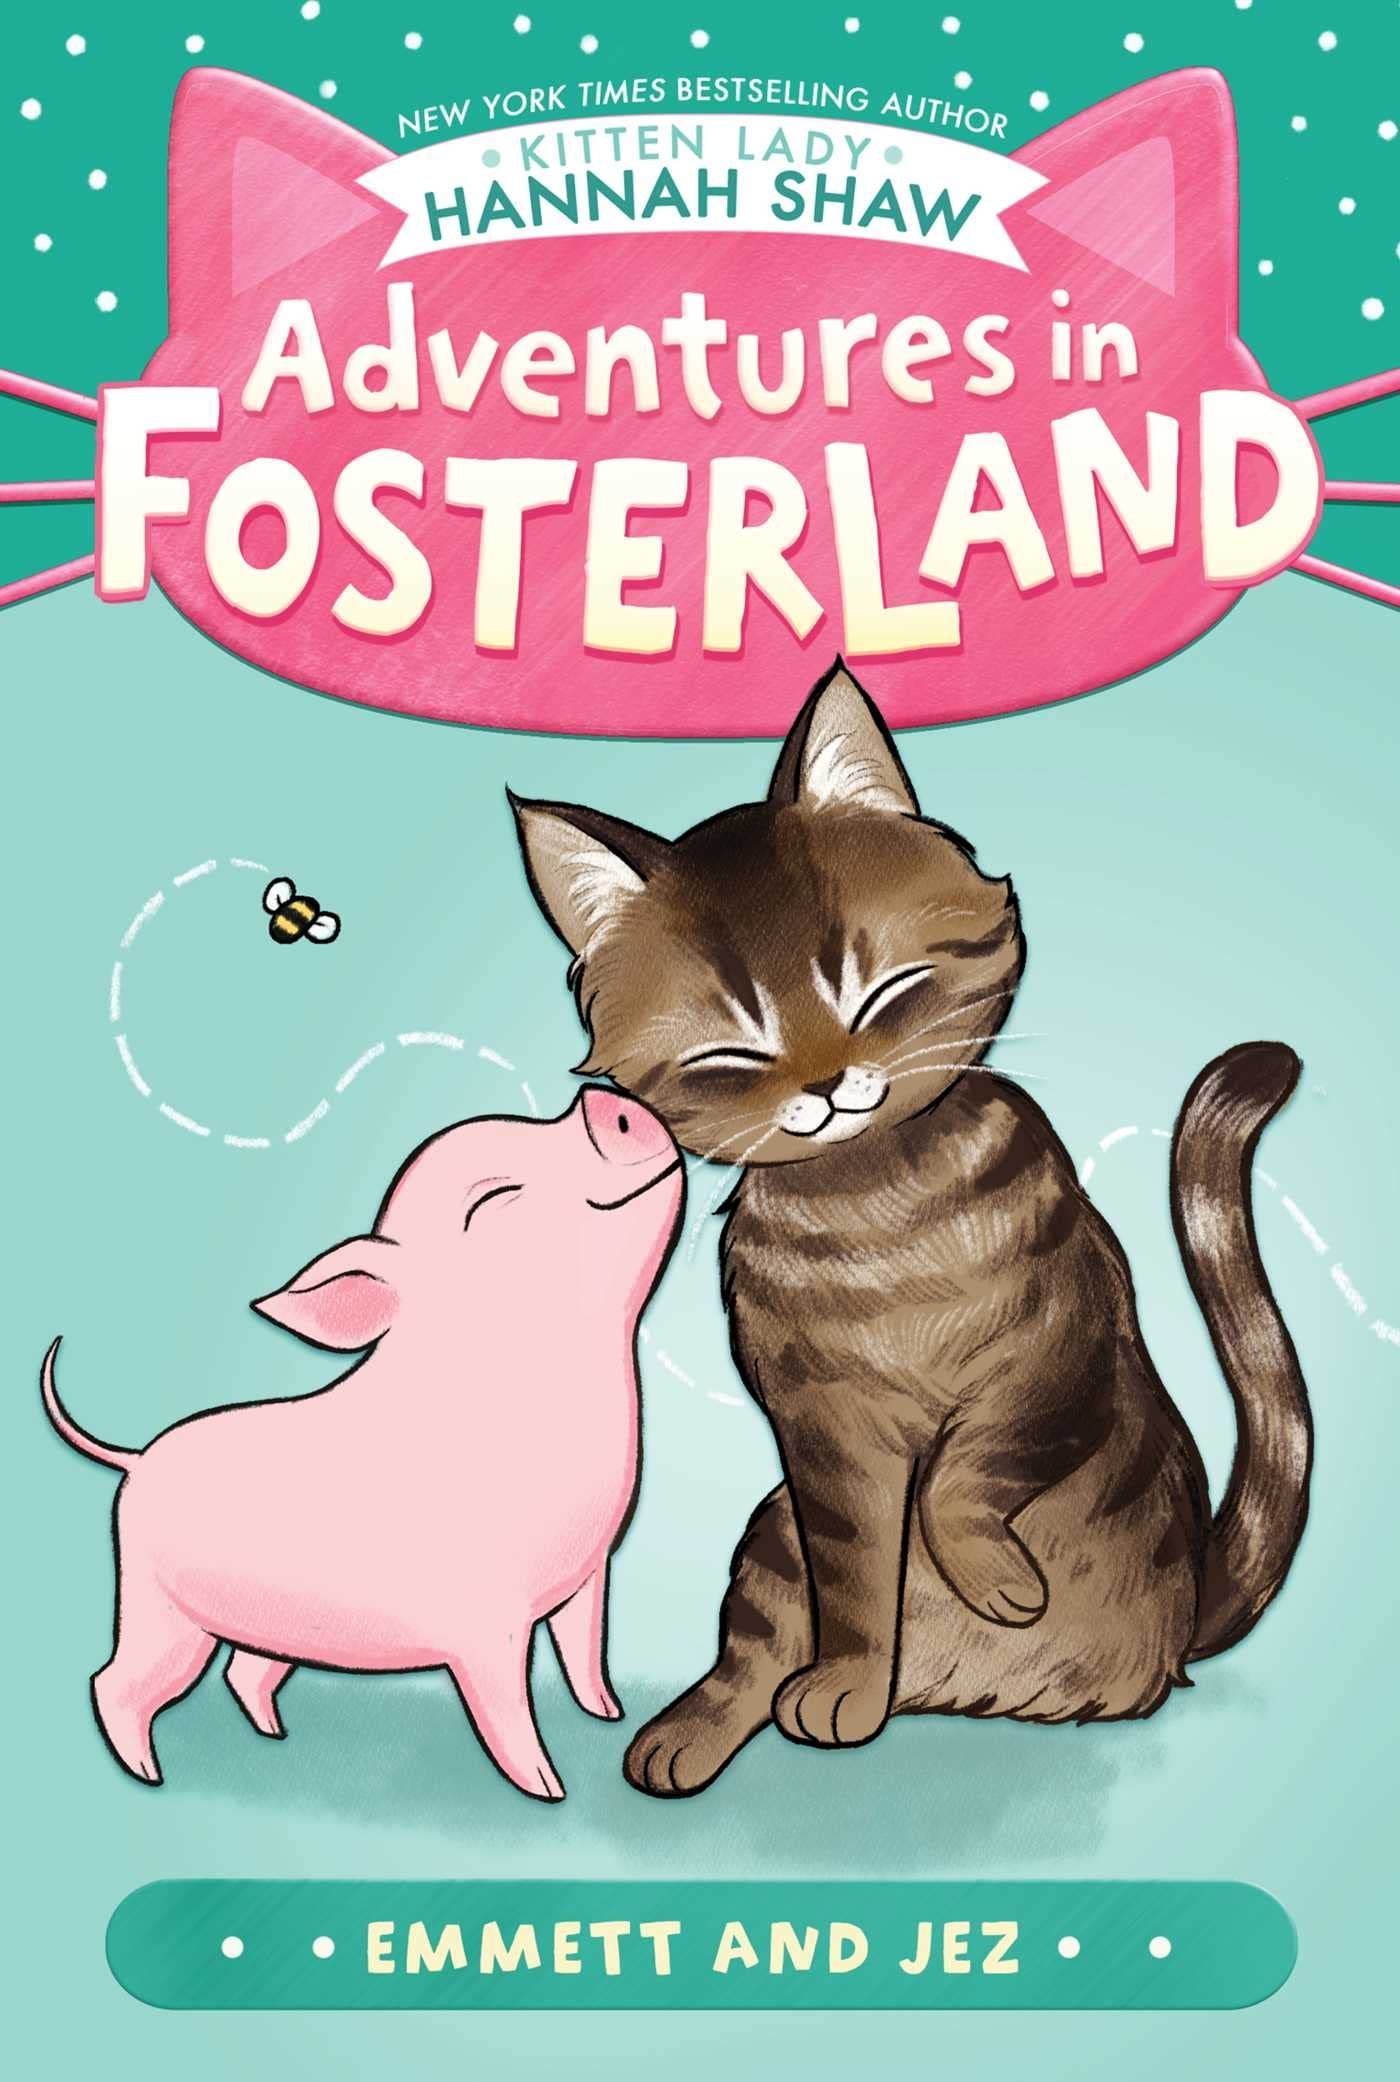 In book one of the Adventures in Fosterland chapter book series, a piglet named Emmett and a kitten named Jez realize they might go to different forever homes.